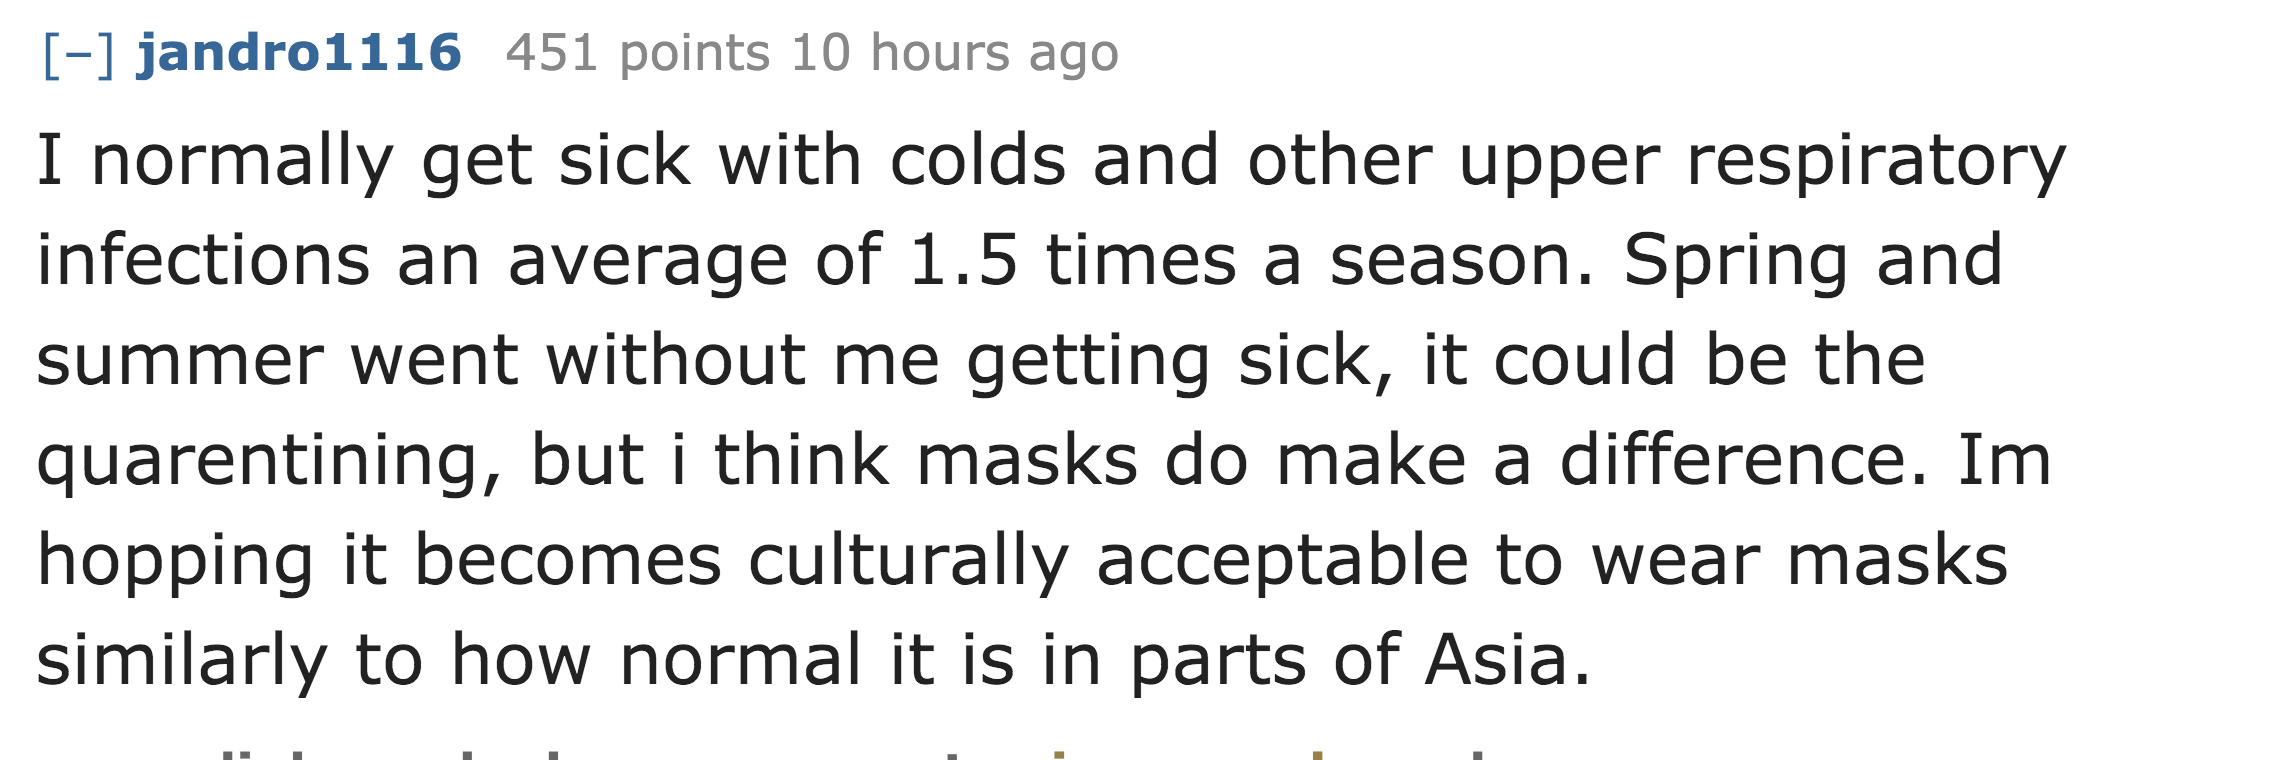 I normally get sick with colds and other upper respiratory infections an average of 1.5 times a season. Spring and summer went without me getting sick, it could be the quarentining, but i think masks do mak